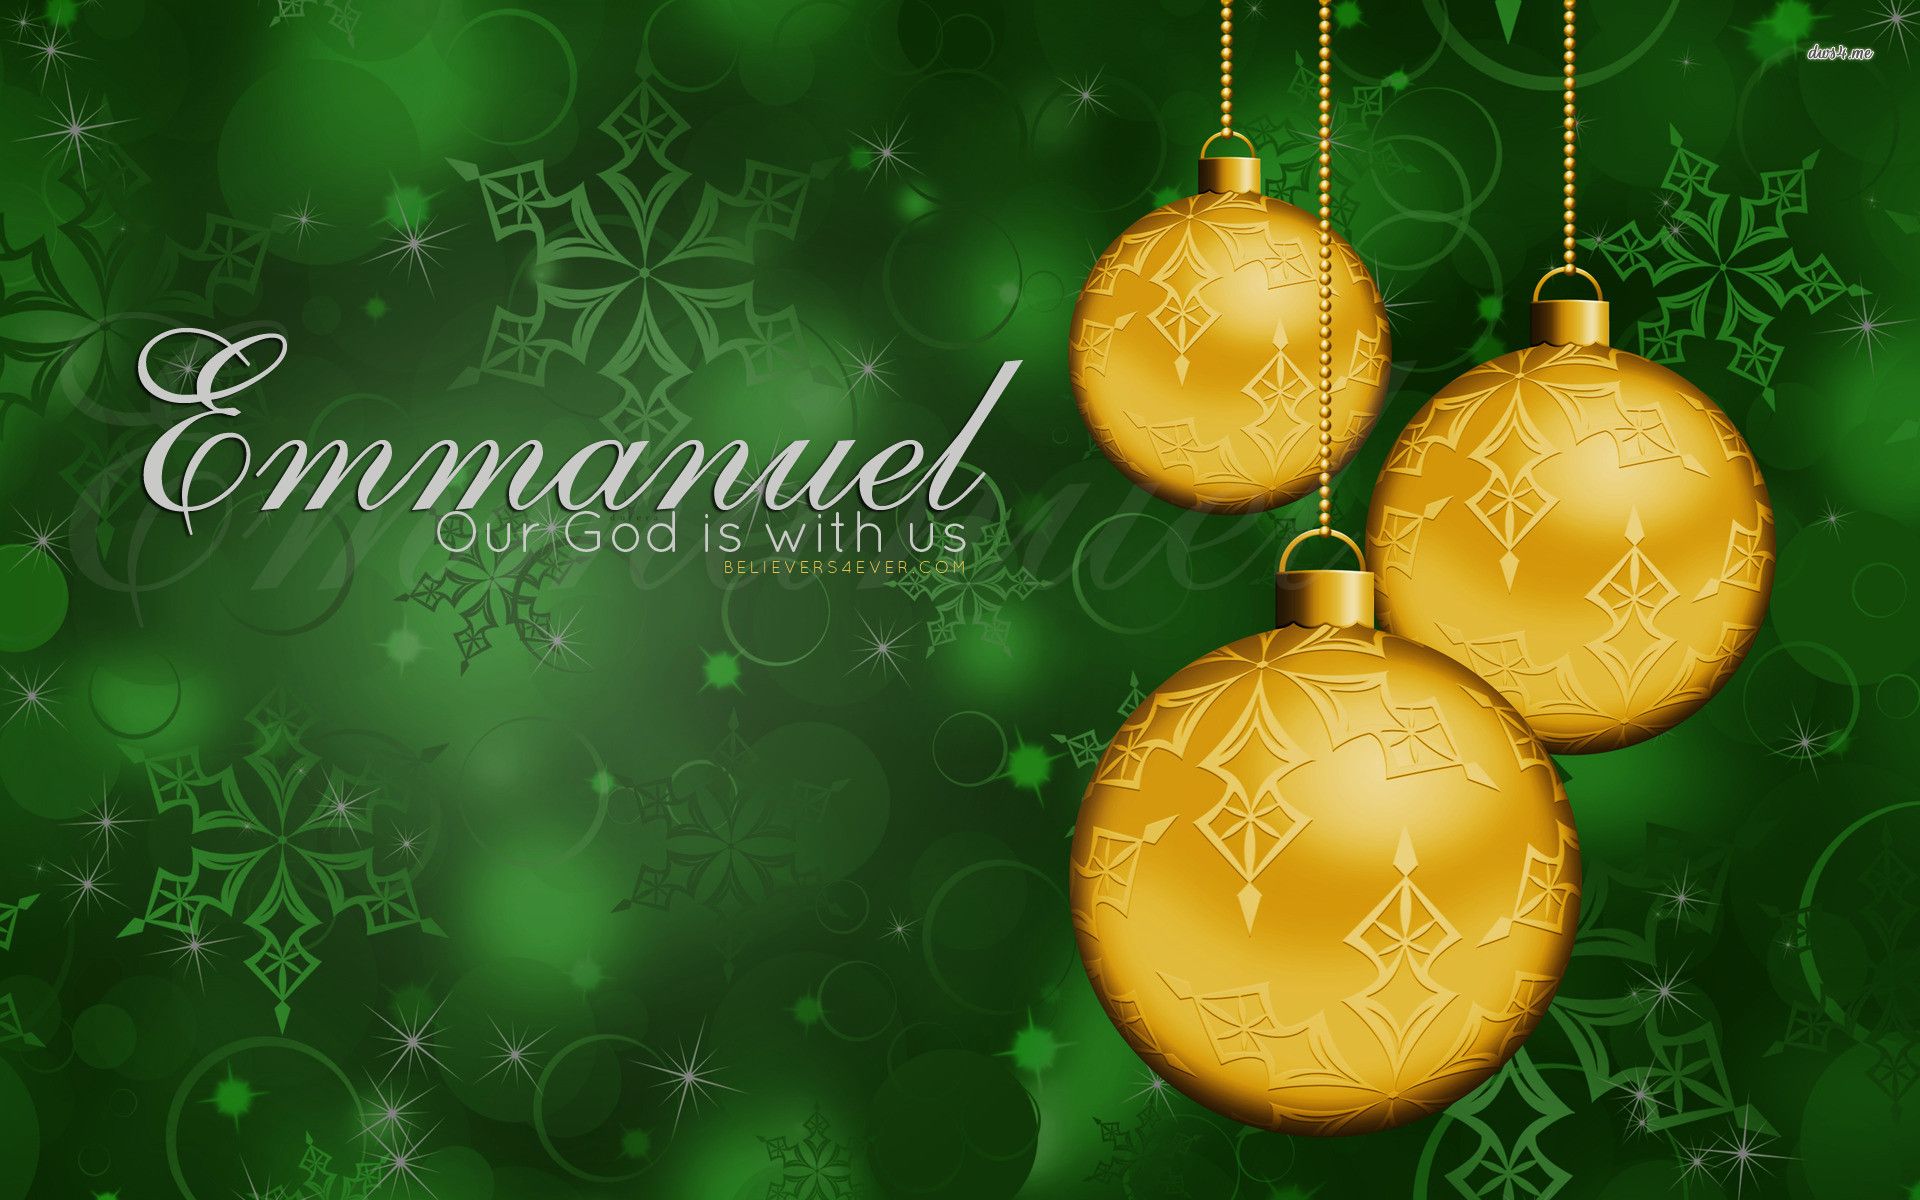 Unique Free Merry Christmas Wallpaper Image. Best Inspirational Picture Quotes & Motivational Image